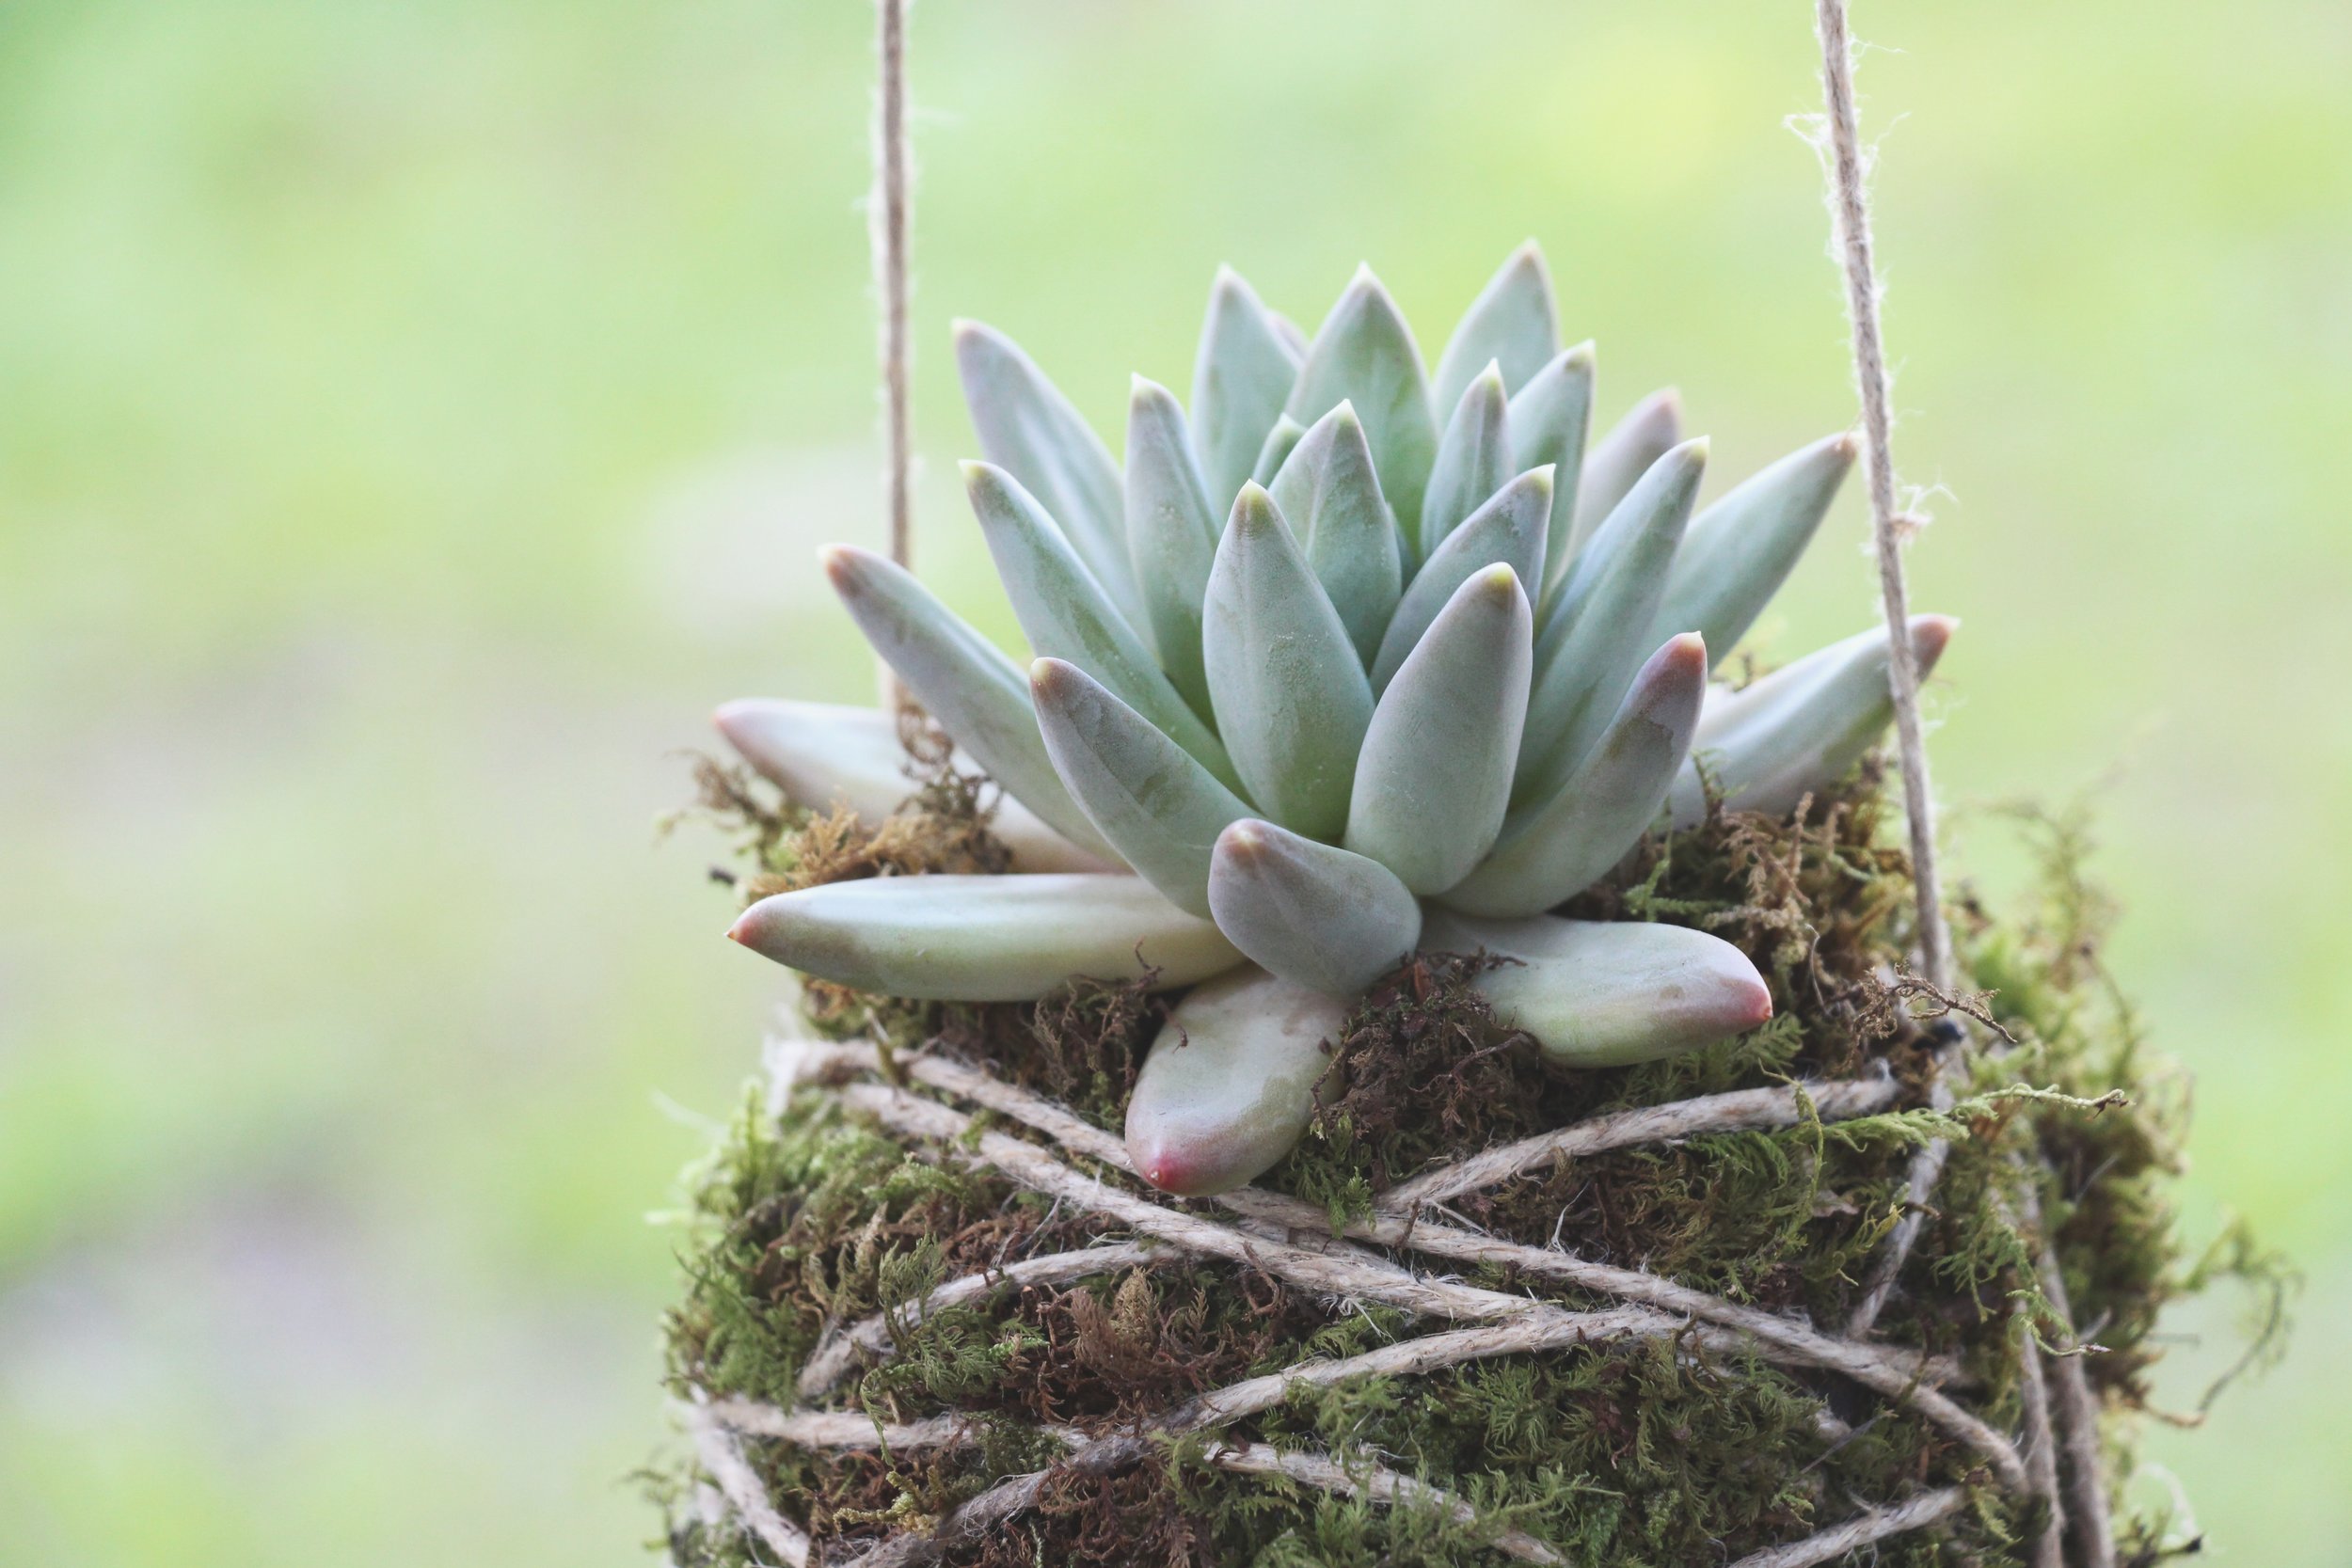 Pachyveria 'Little Jewel' succulent photo by Needles + Leaves